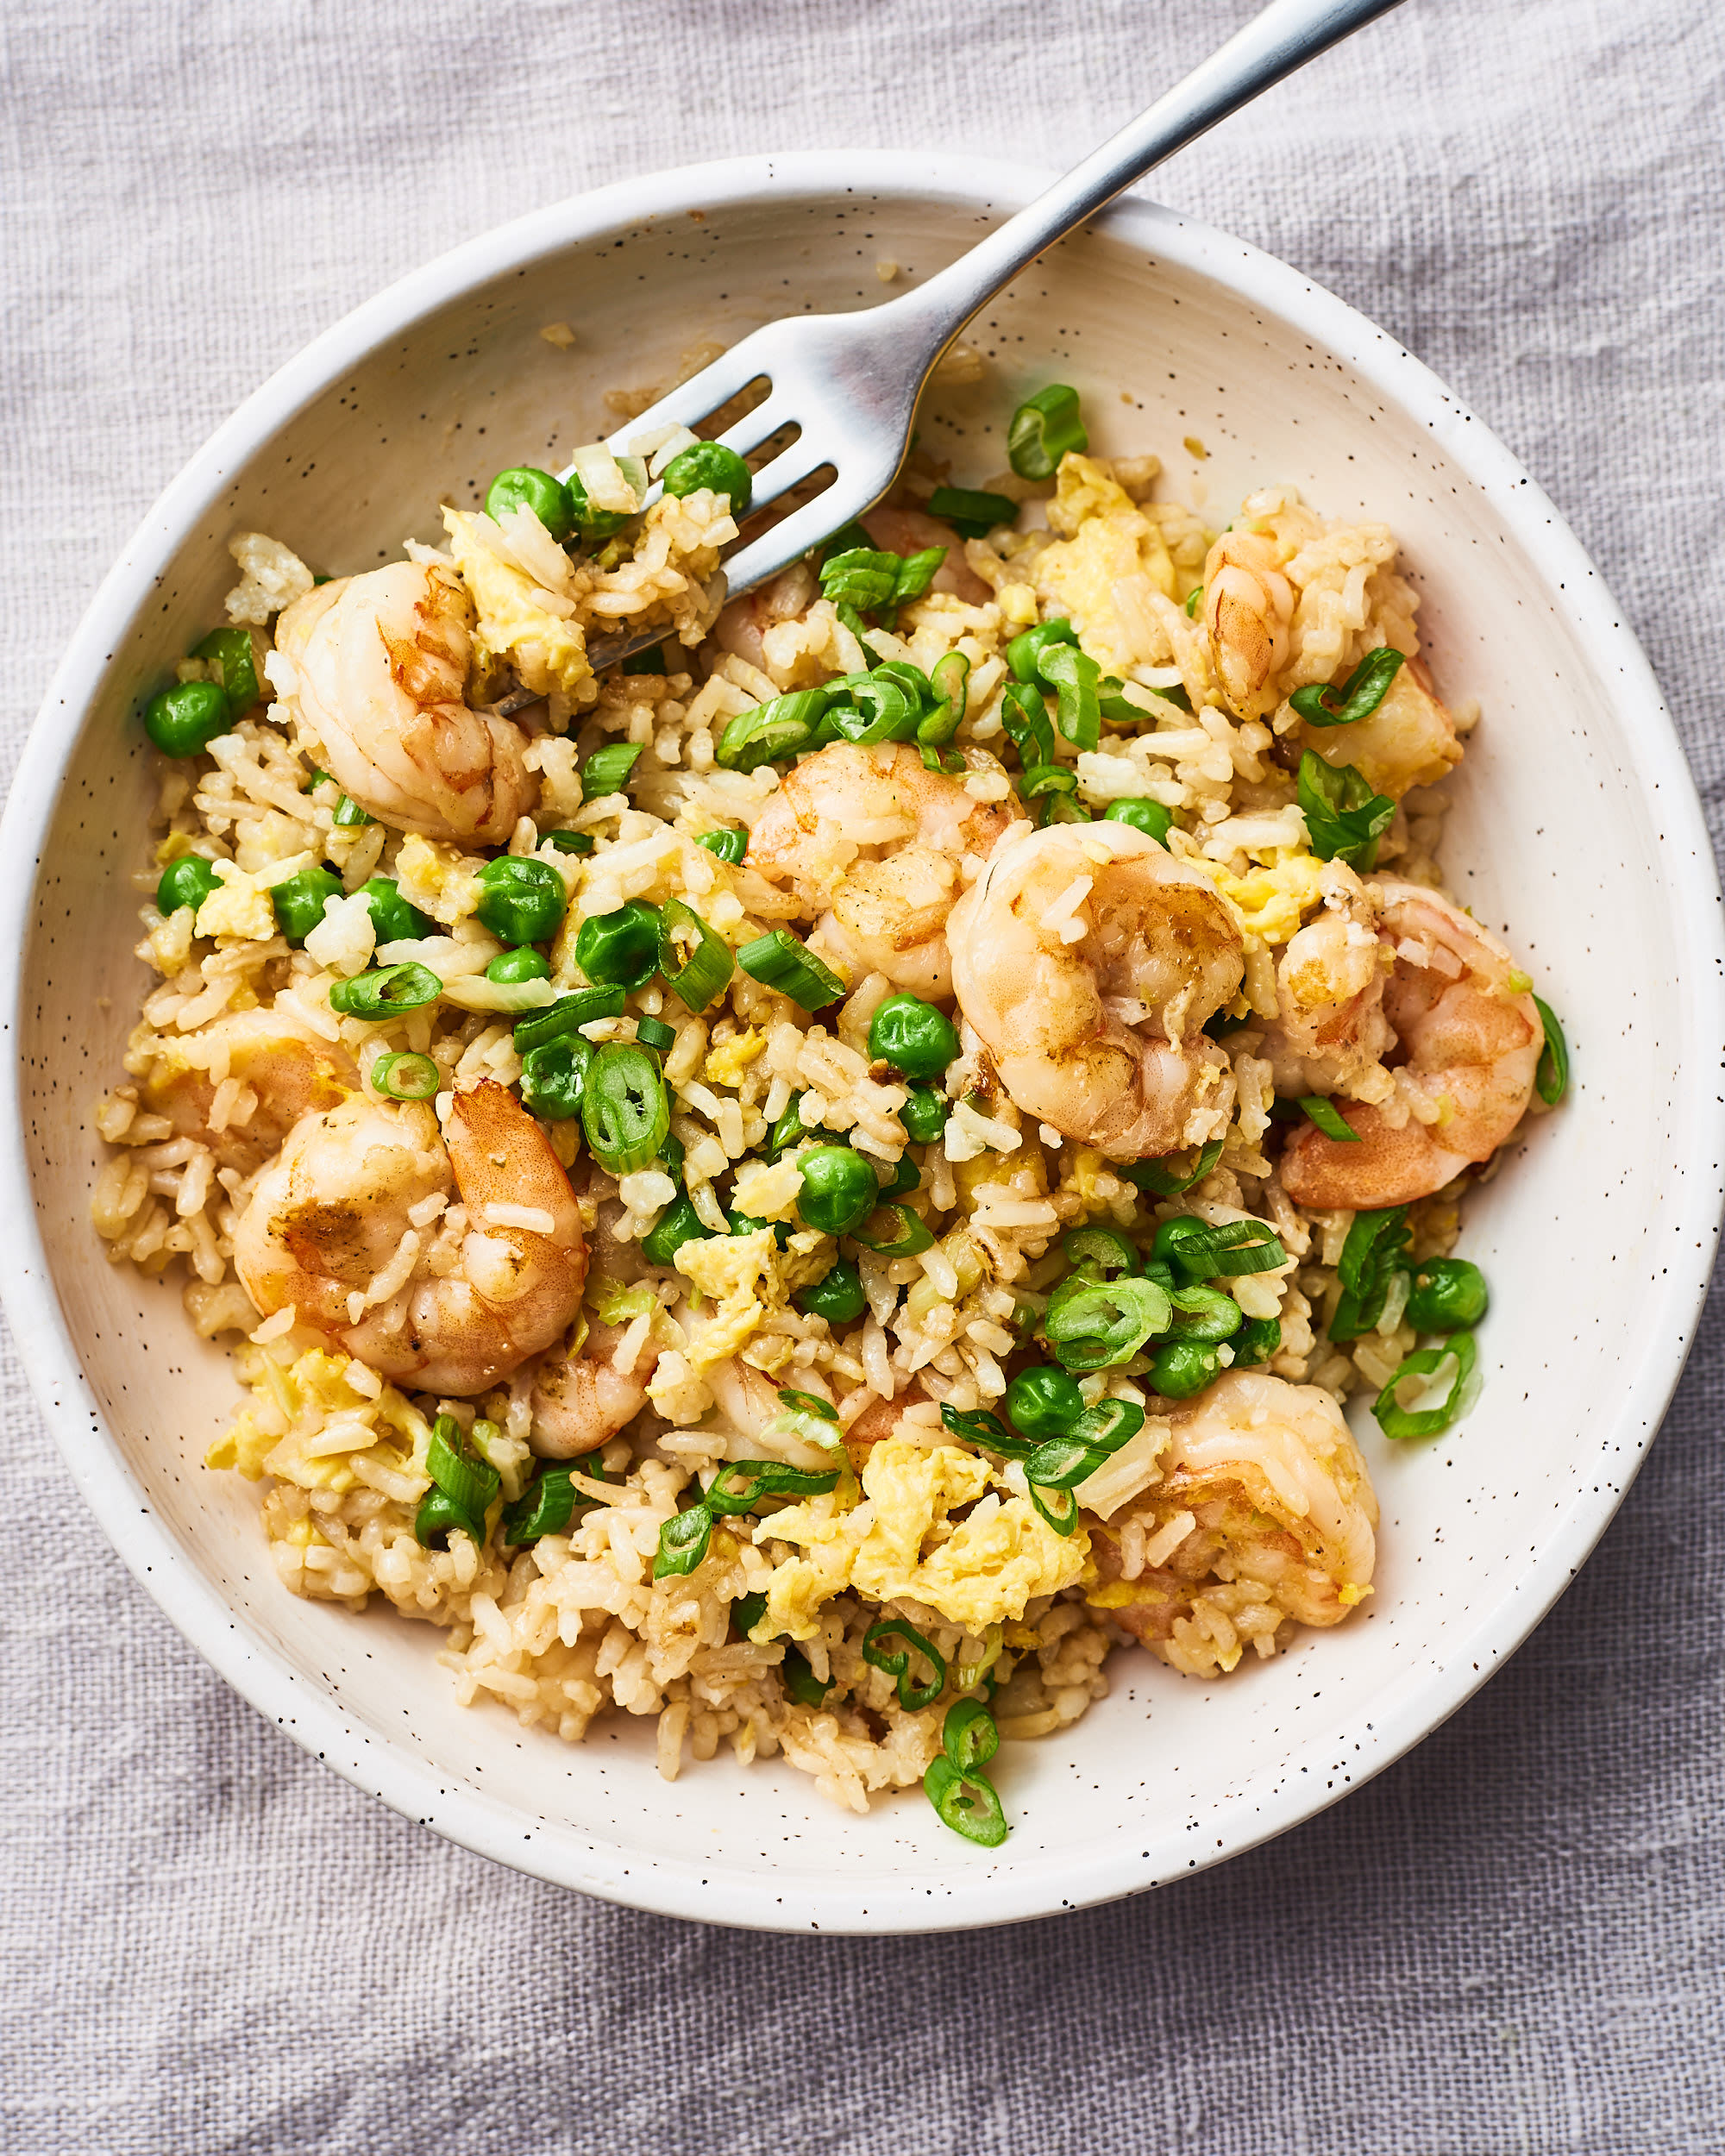 Shrimp Fried Rice Recipe That's Better Than Takeout | Kitchn